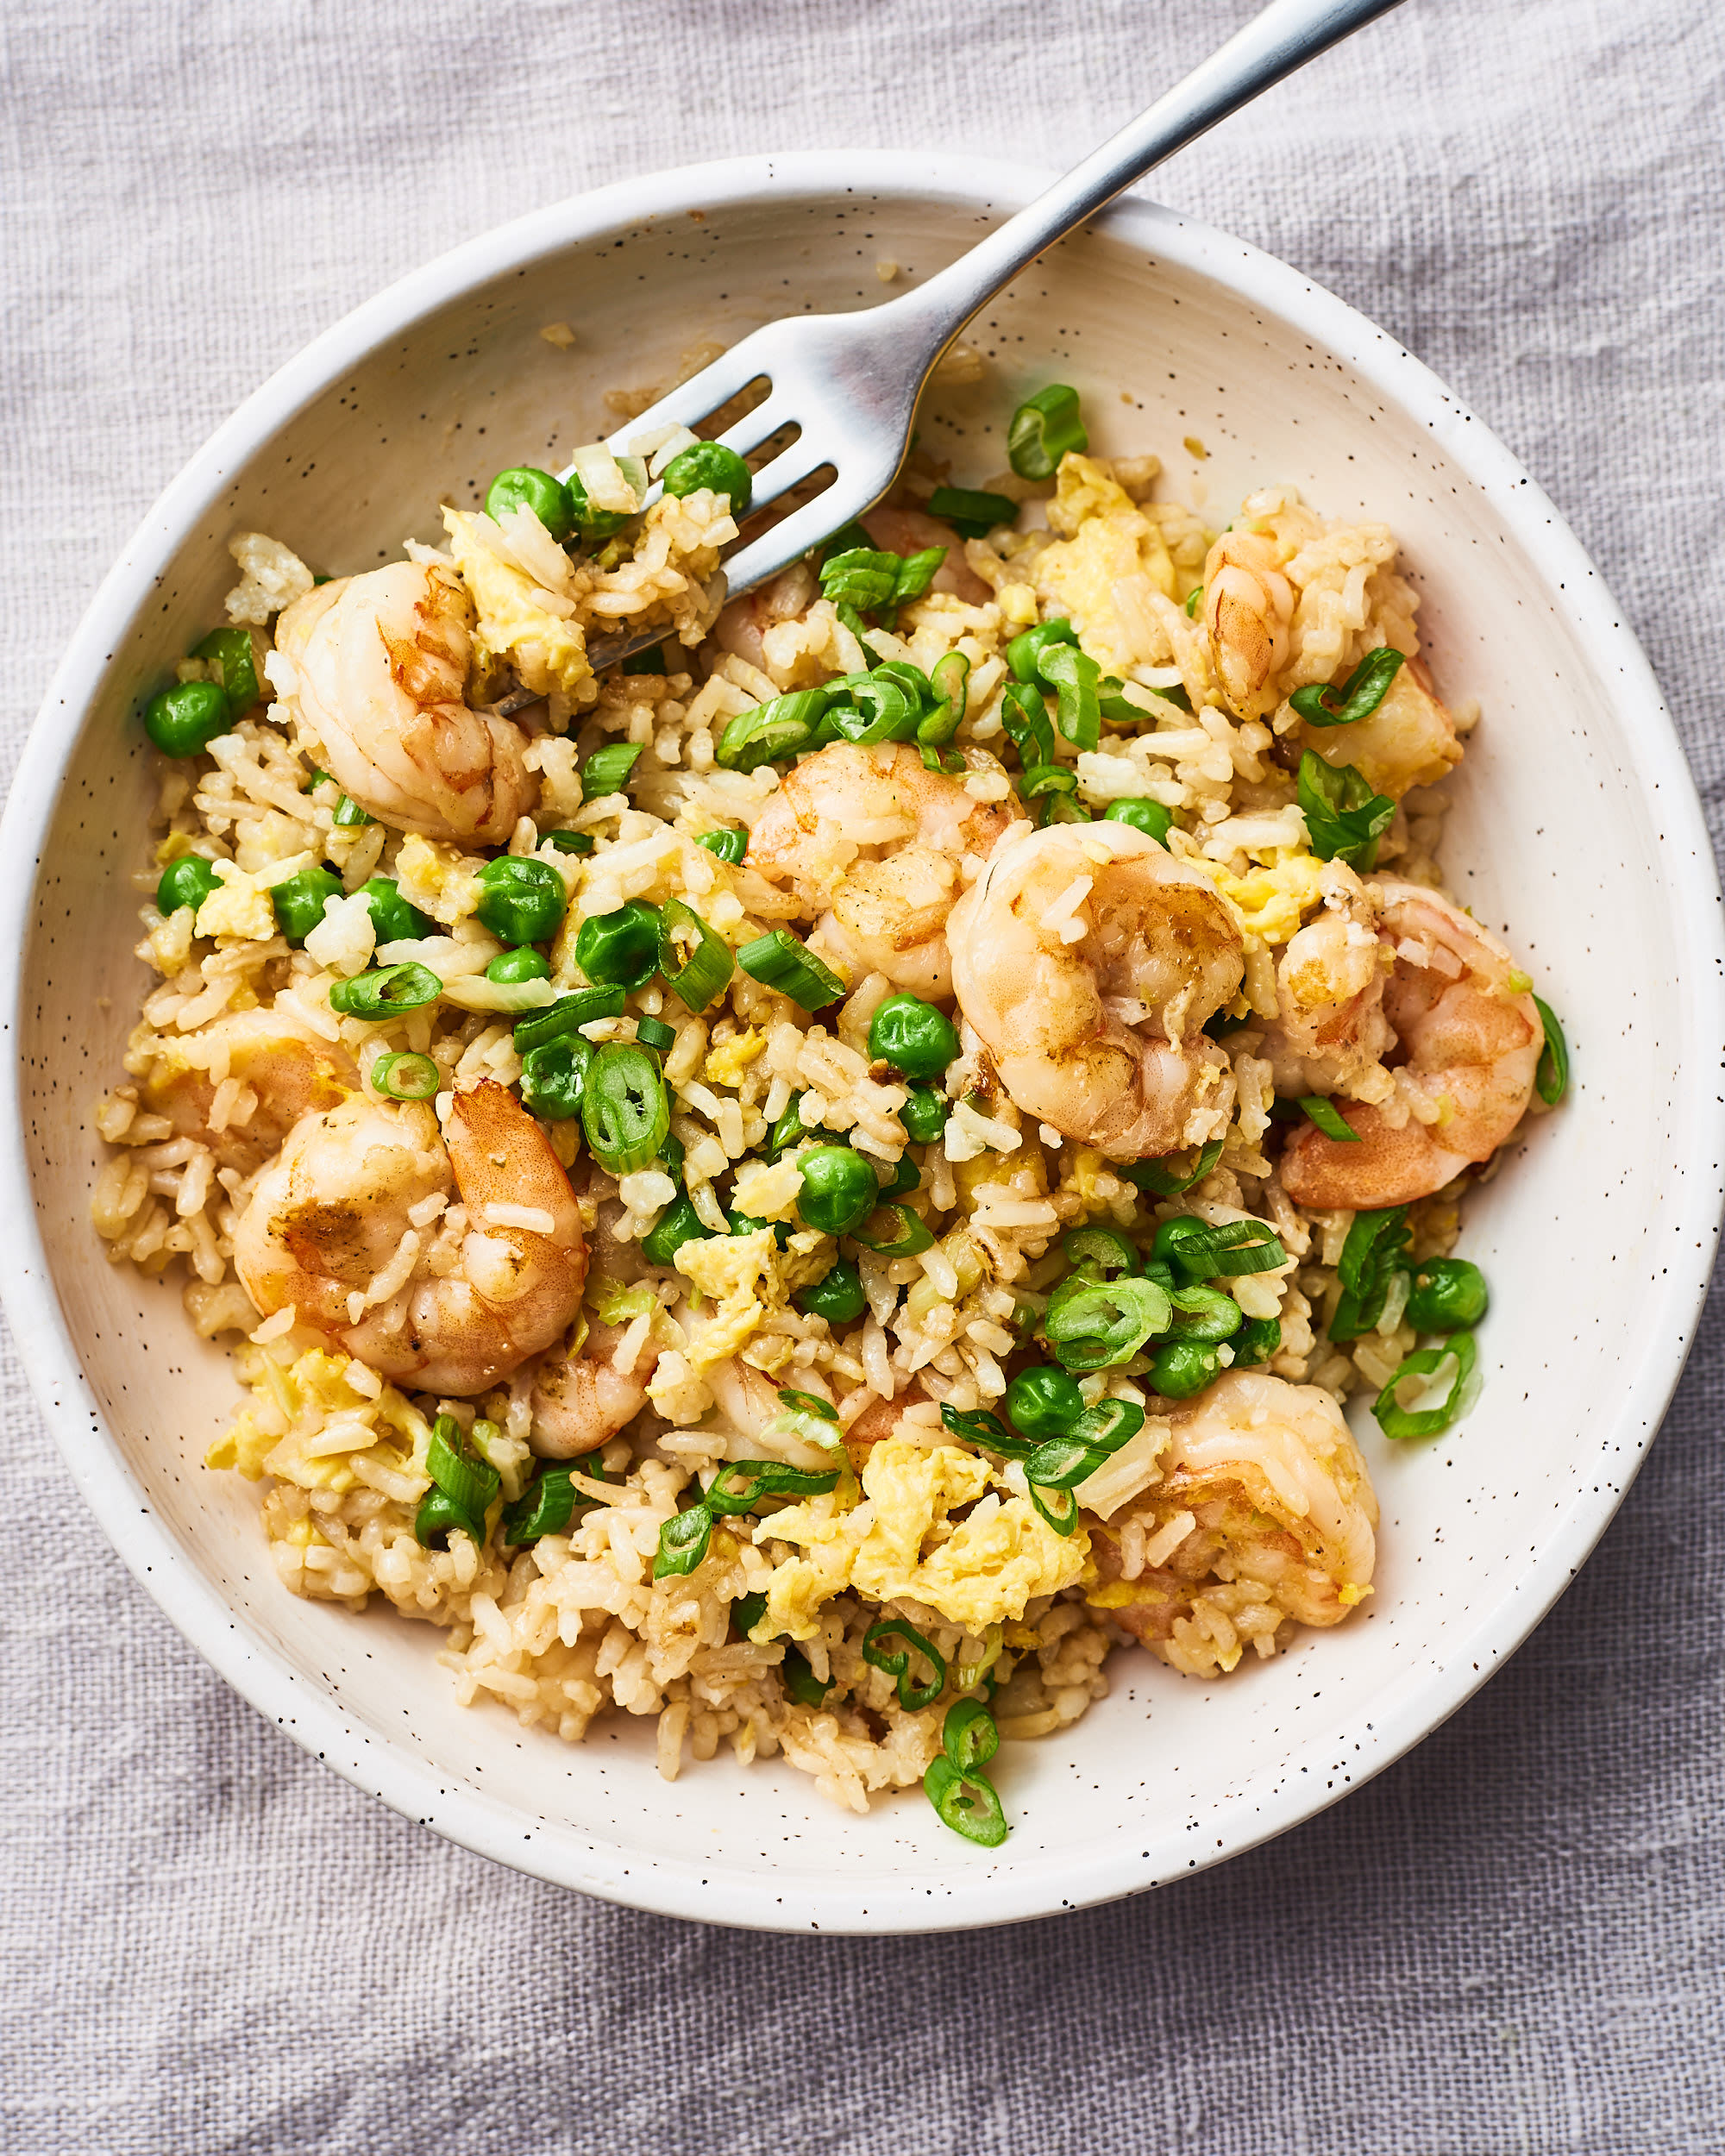 Shrimp Fried Rice Recipe That's Better Than Takeout | Kitchn